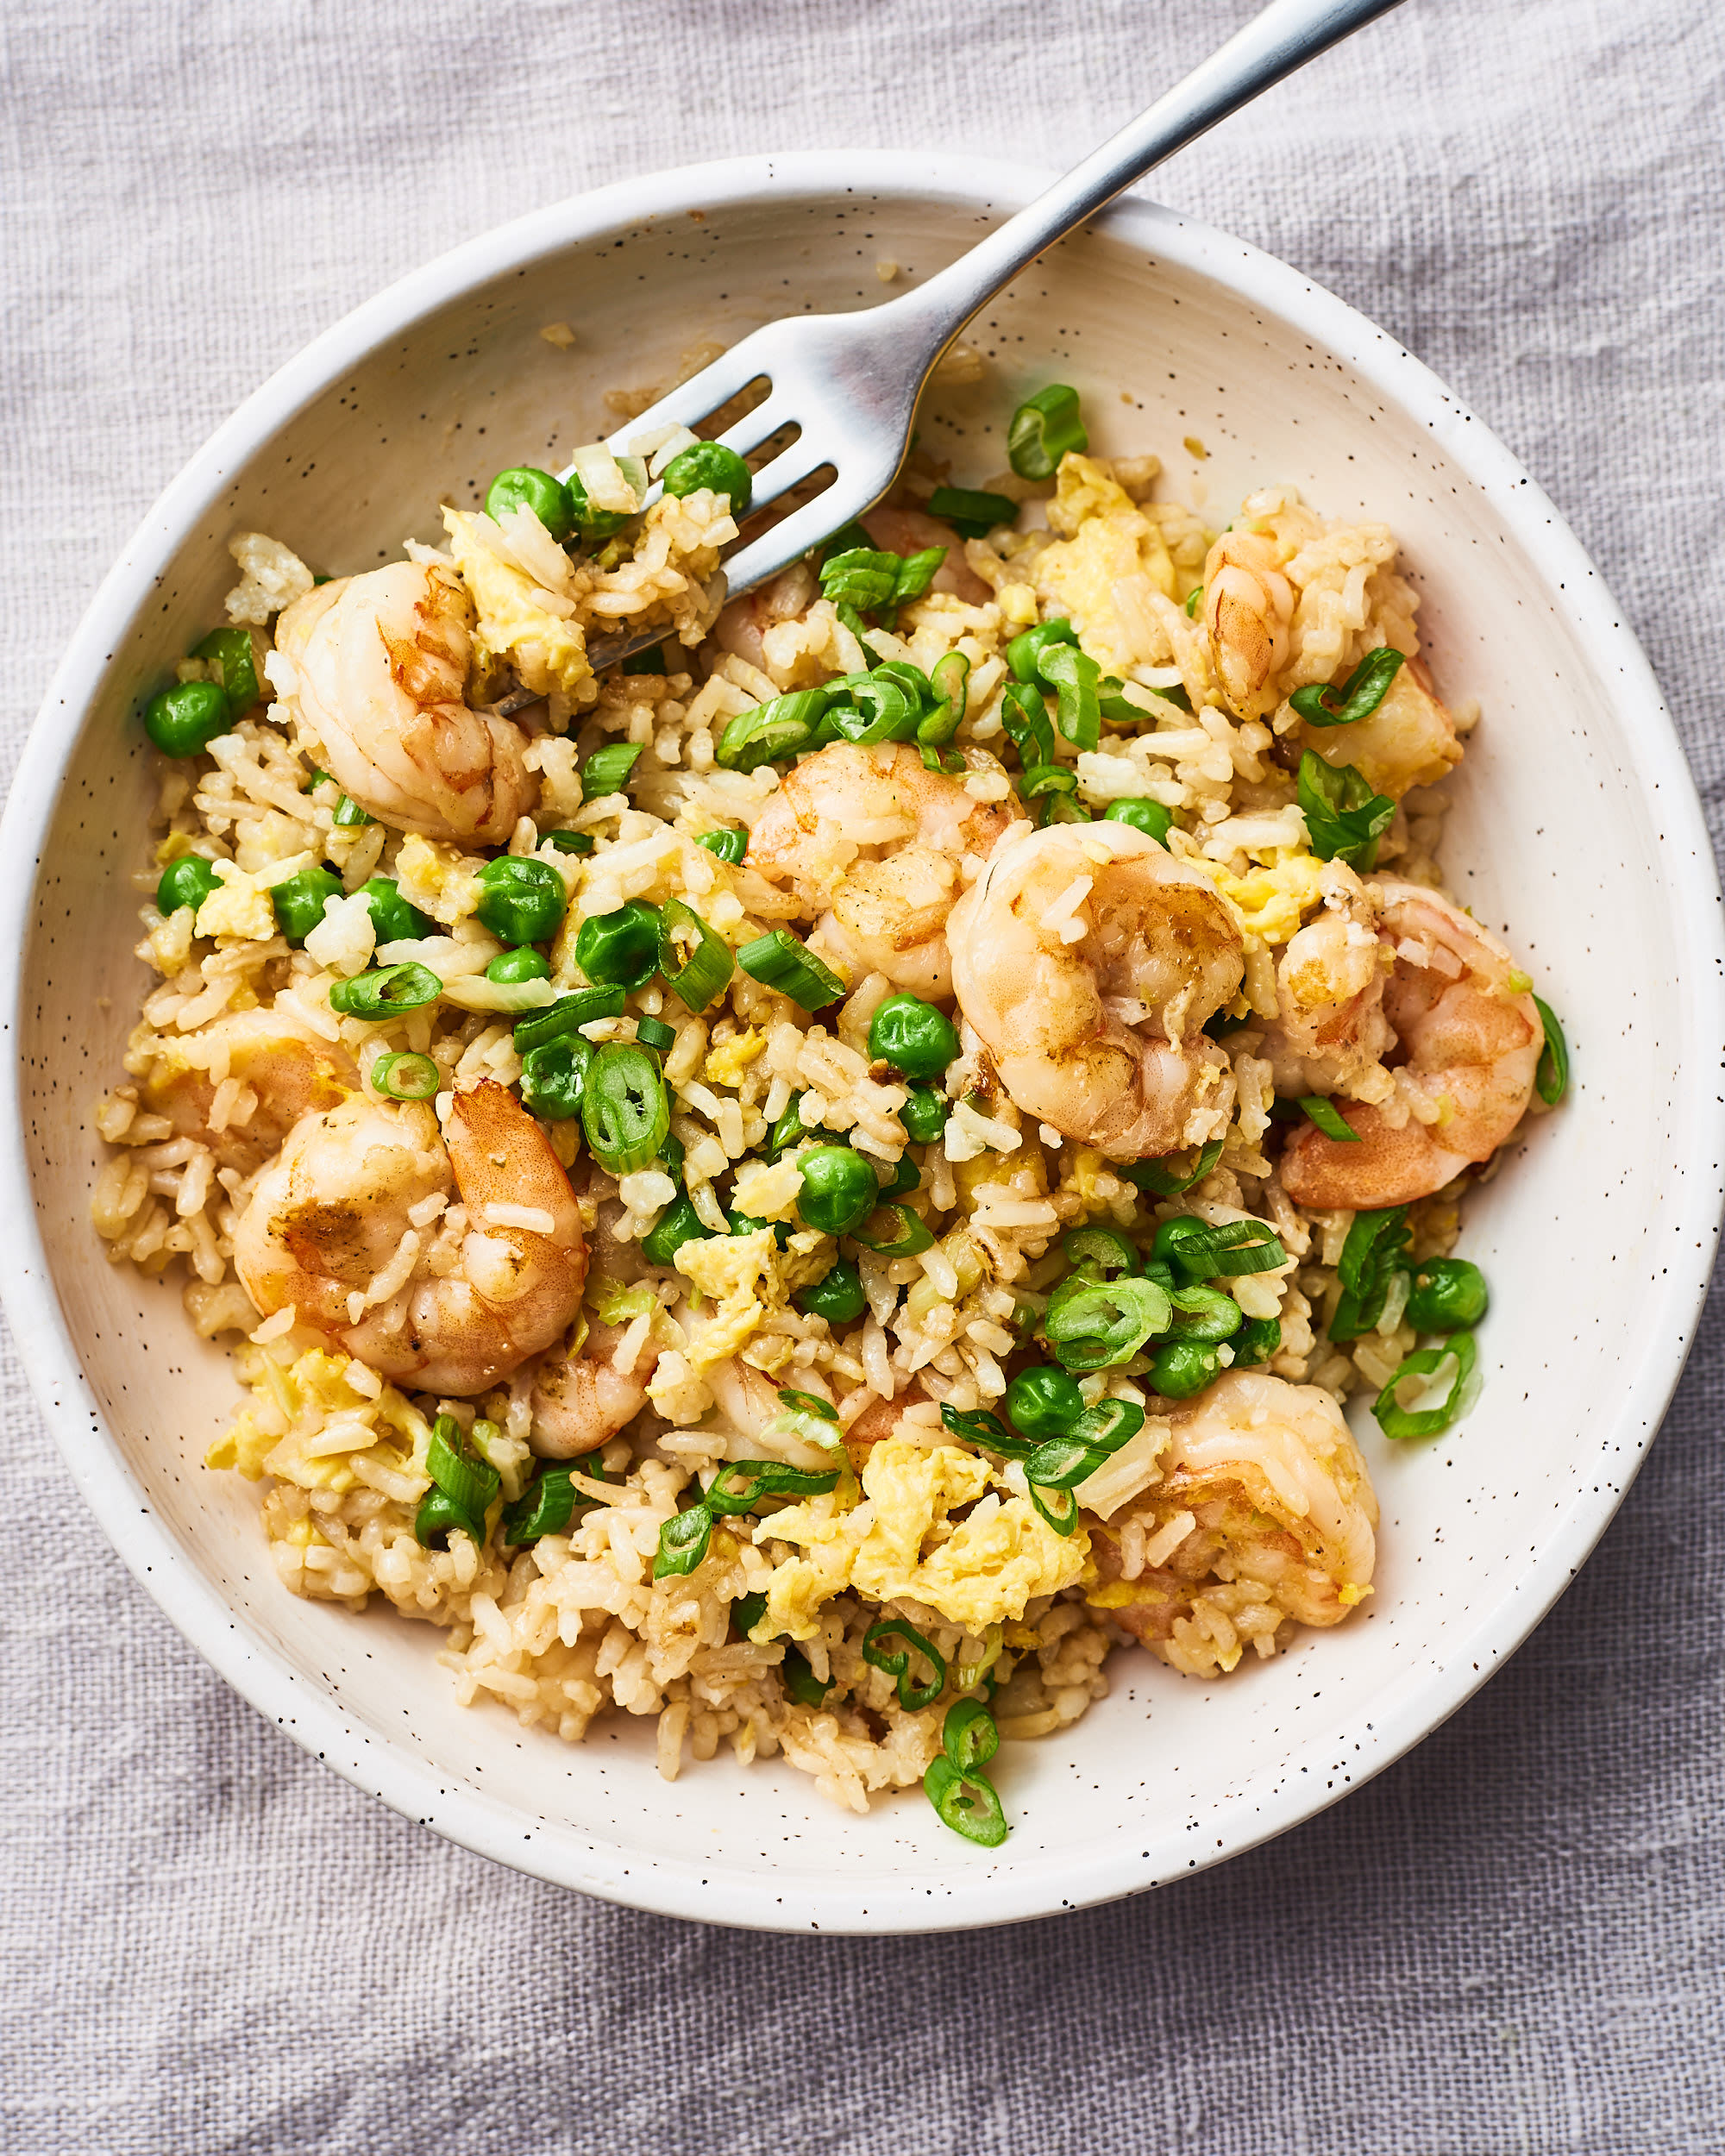 Shrimp Fried Rice Recipe That's Better Than Takeout | Kitchn